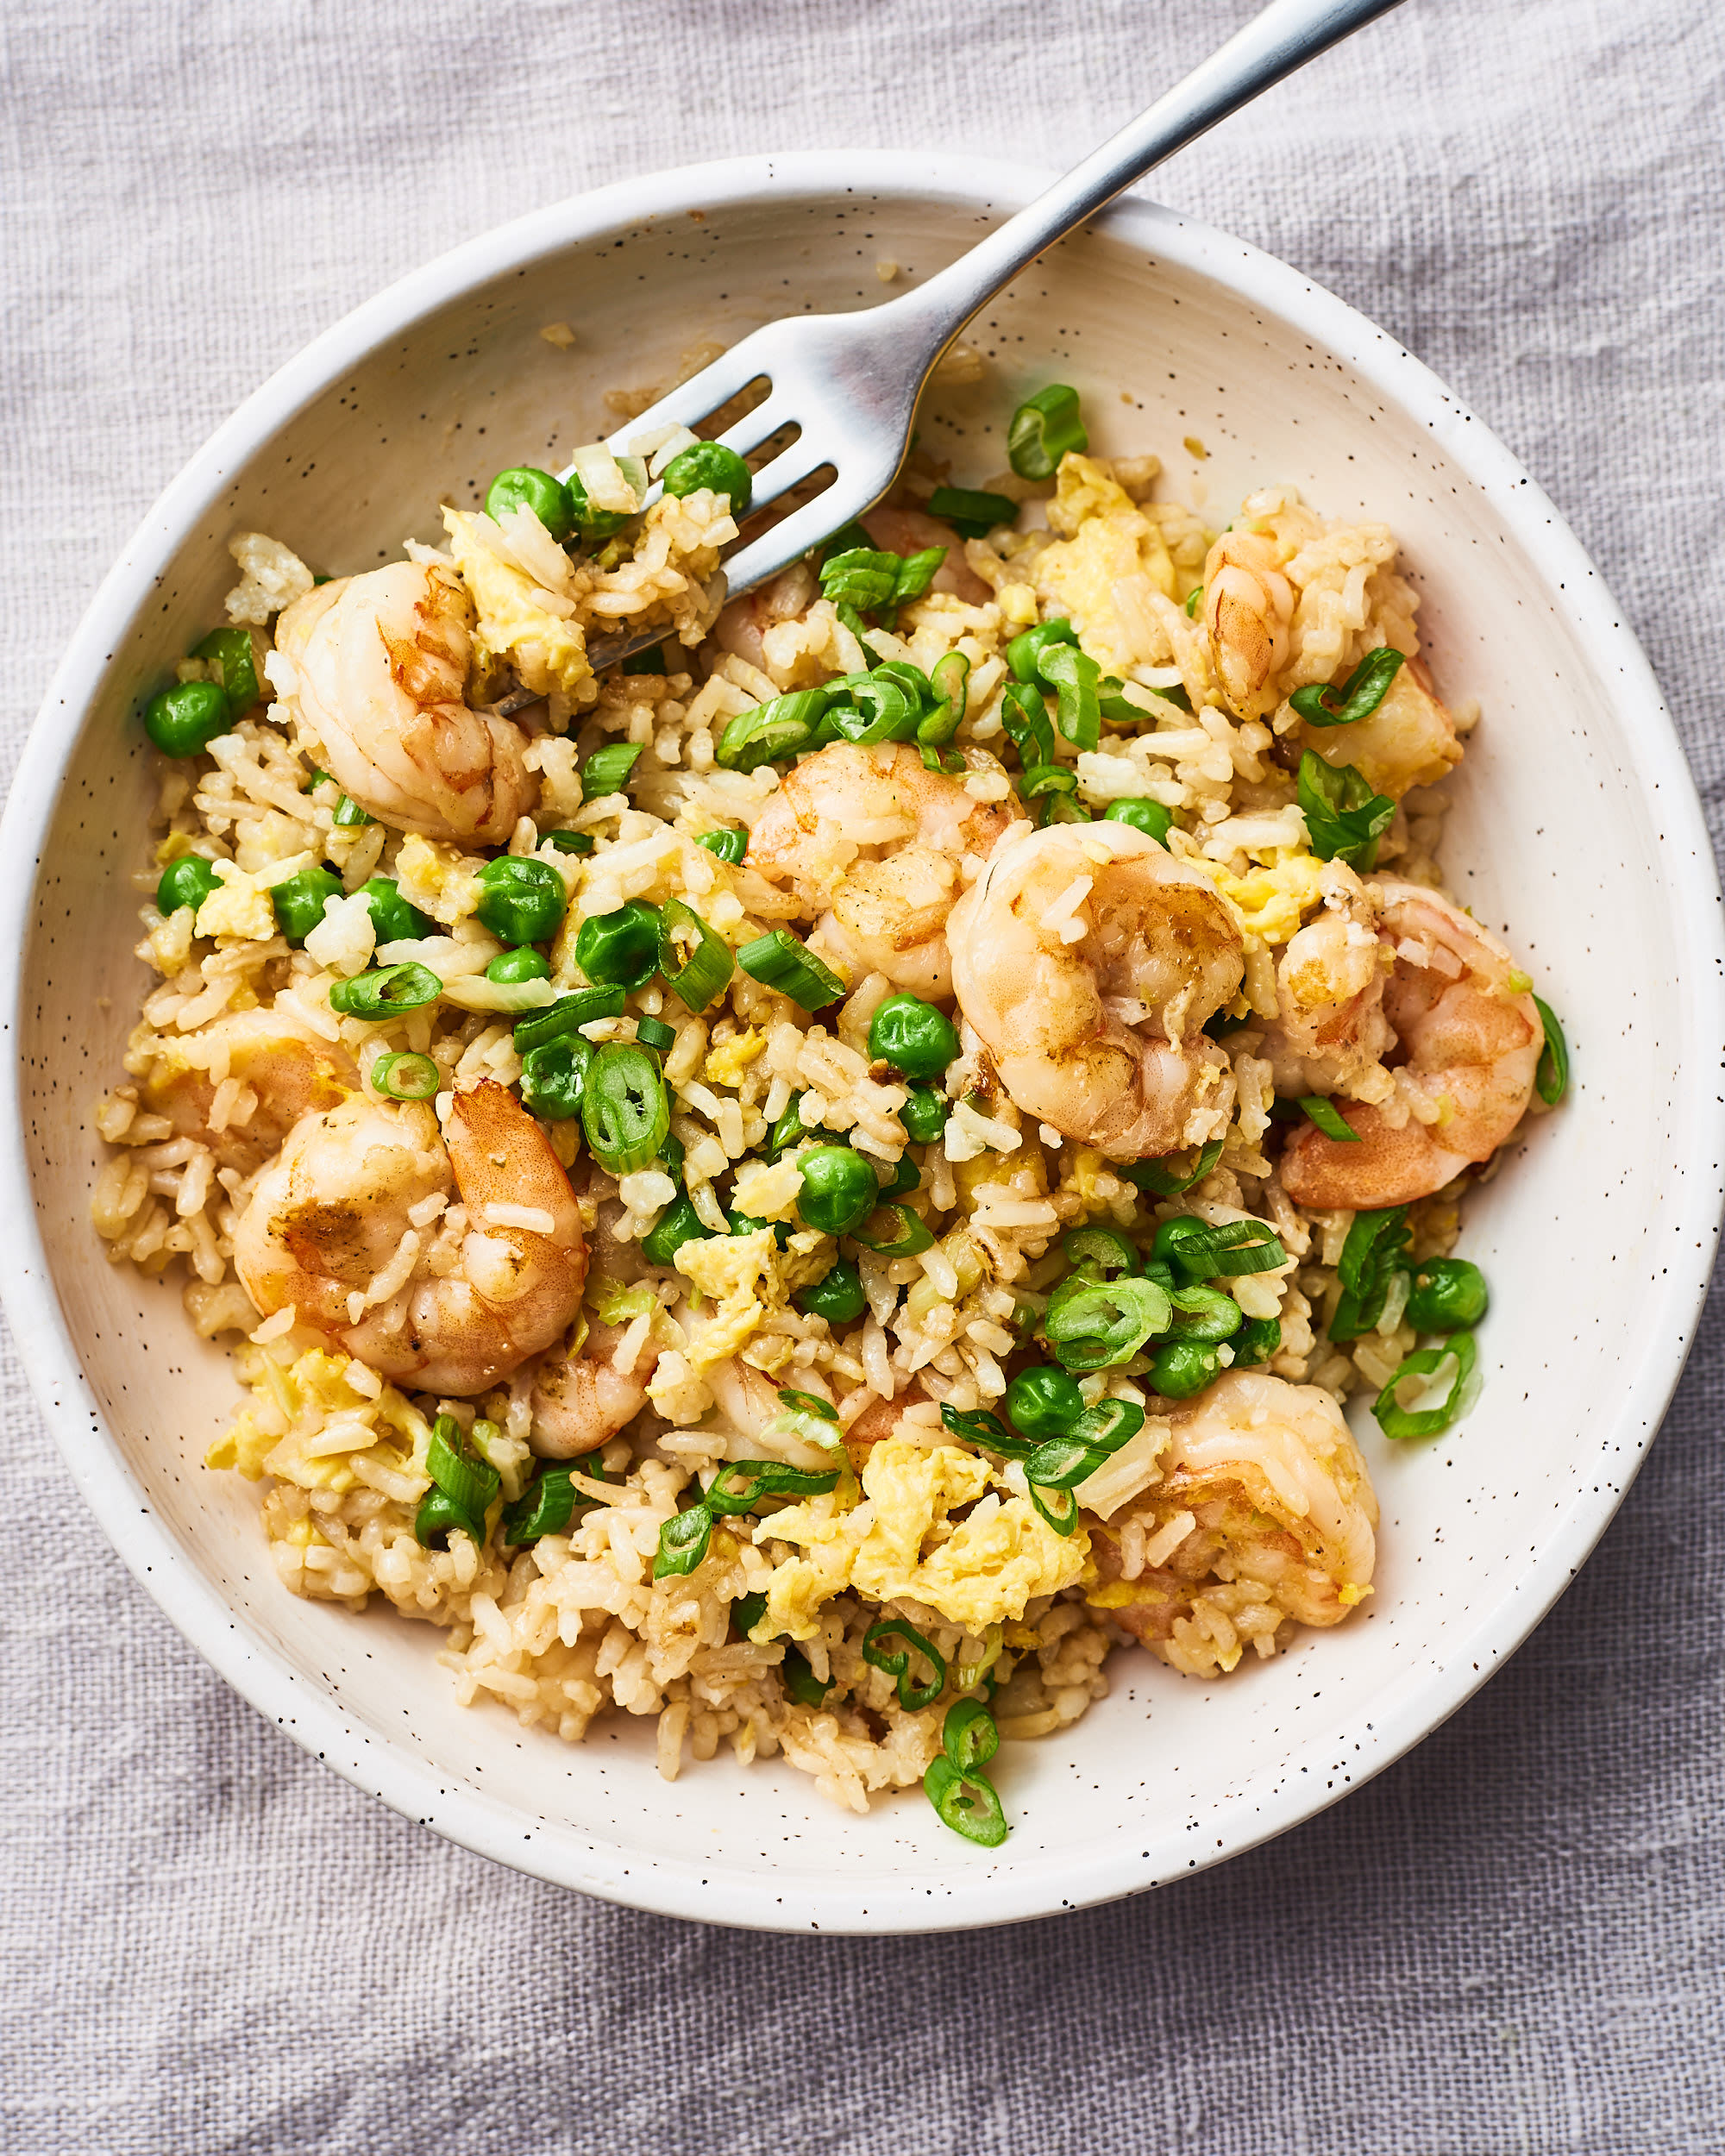 Shrimp Fried Rice Recipe That's Better Than Takeout | Kitchn